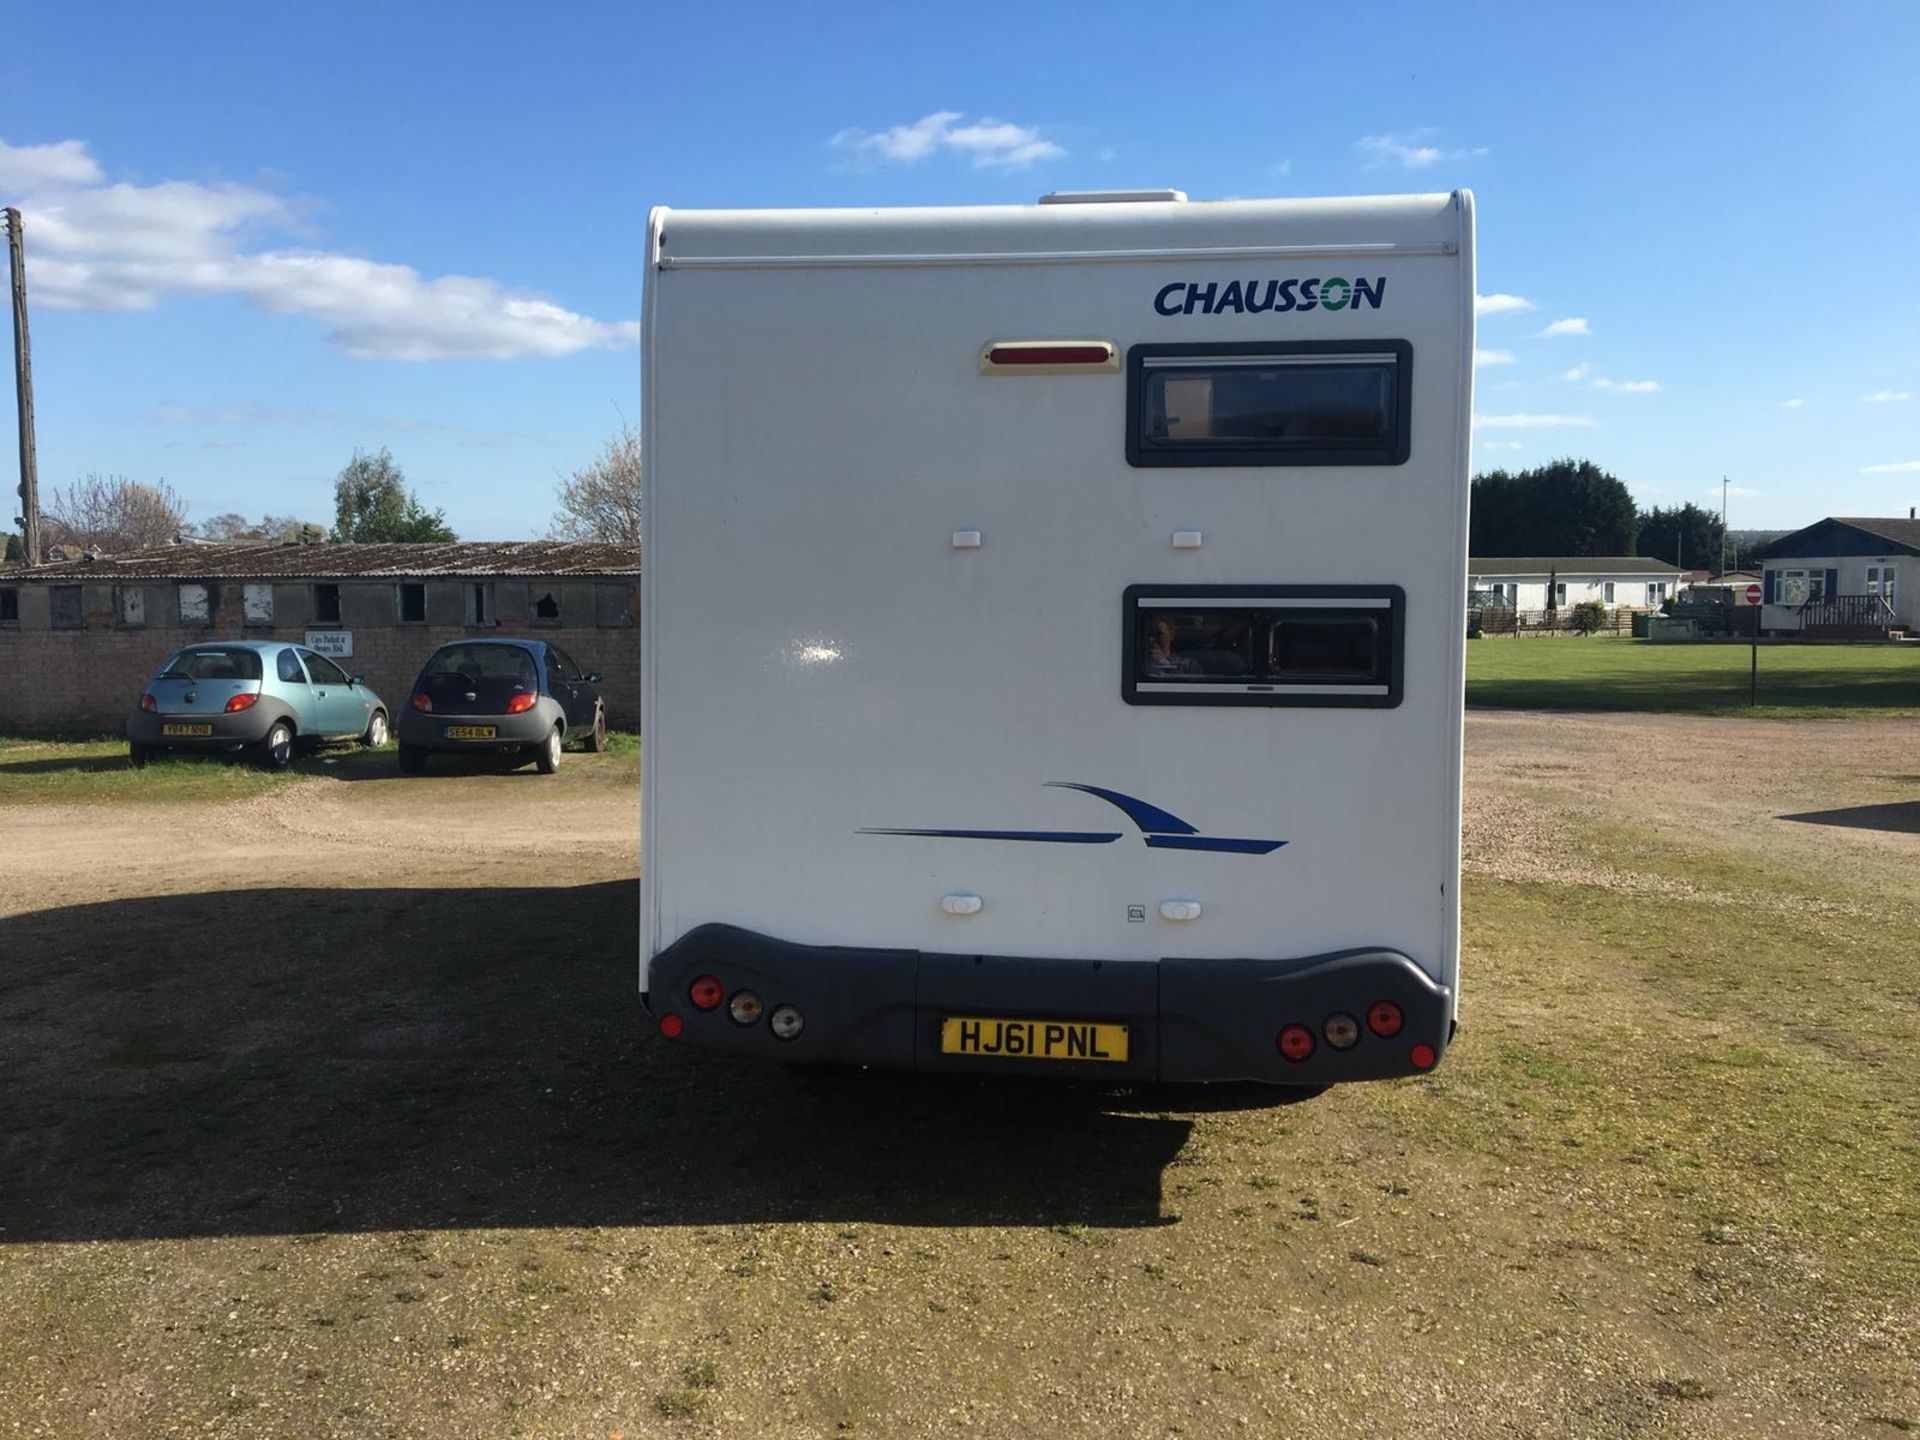 2011/61 REG FORD TRANSIT 85 T280S FWD CHAUSSON FLASH S3 6 BERTH MOTOR-HOME, LOW MILES 40K *NO VAT* - Image 6 of 23